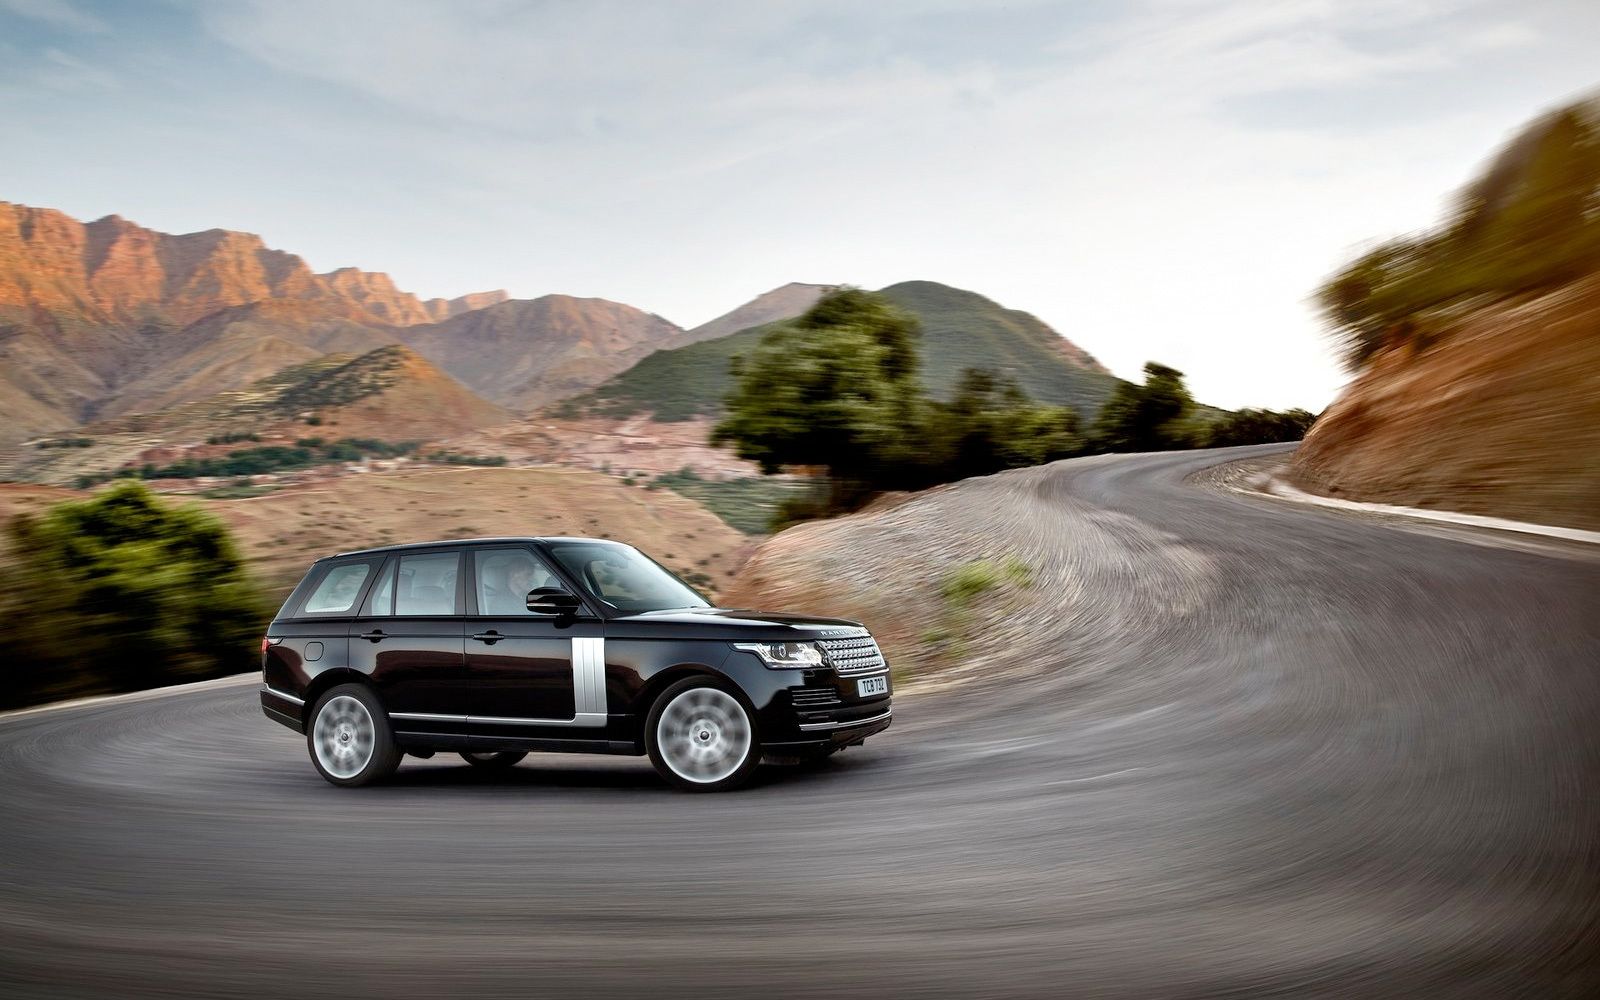 2015 Range Rover in black on a winding road